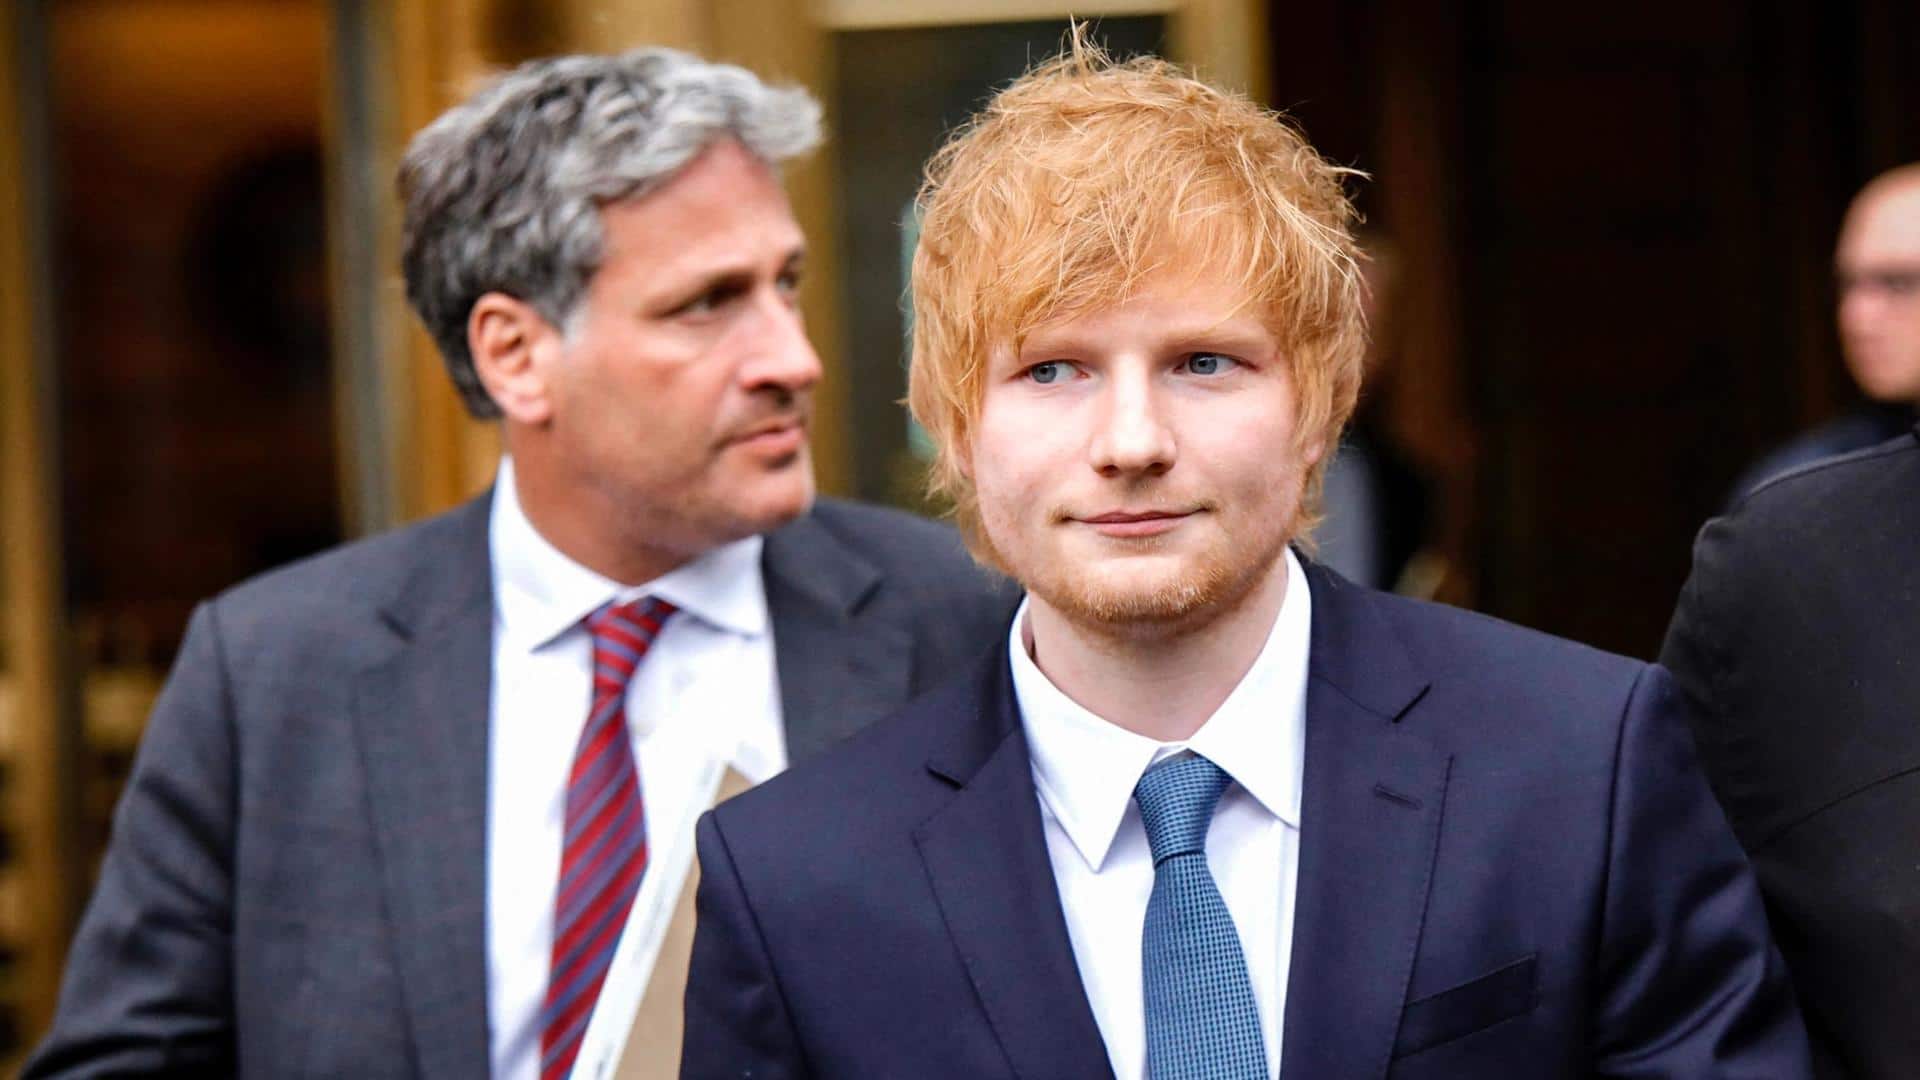 Ed Sheeran accused of copying Marvin Gaye classic, attends trial